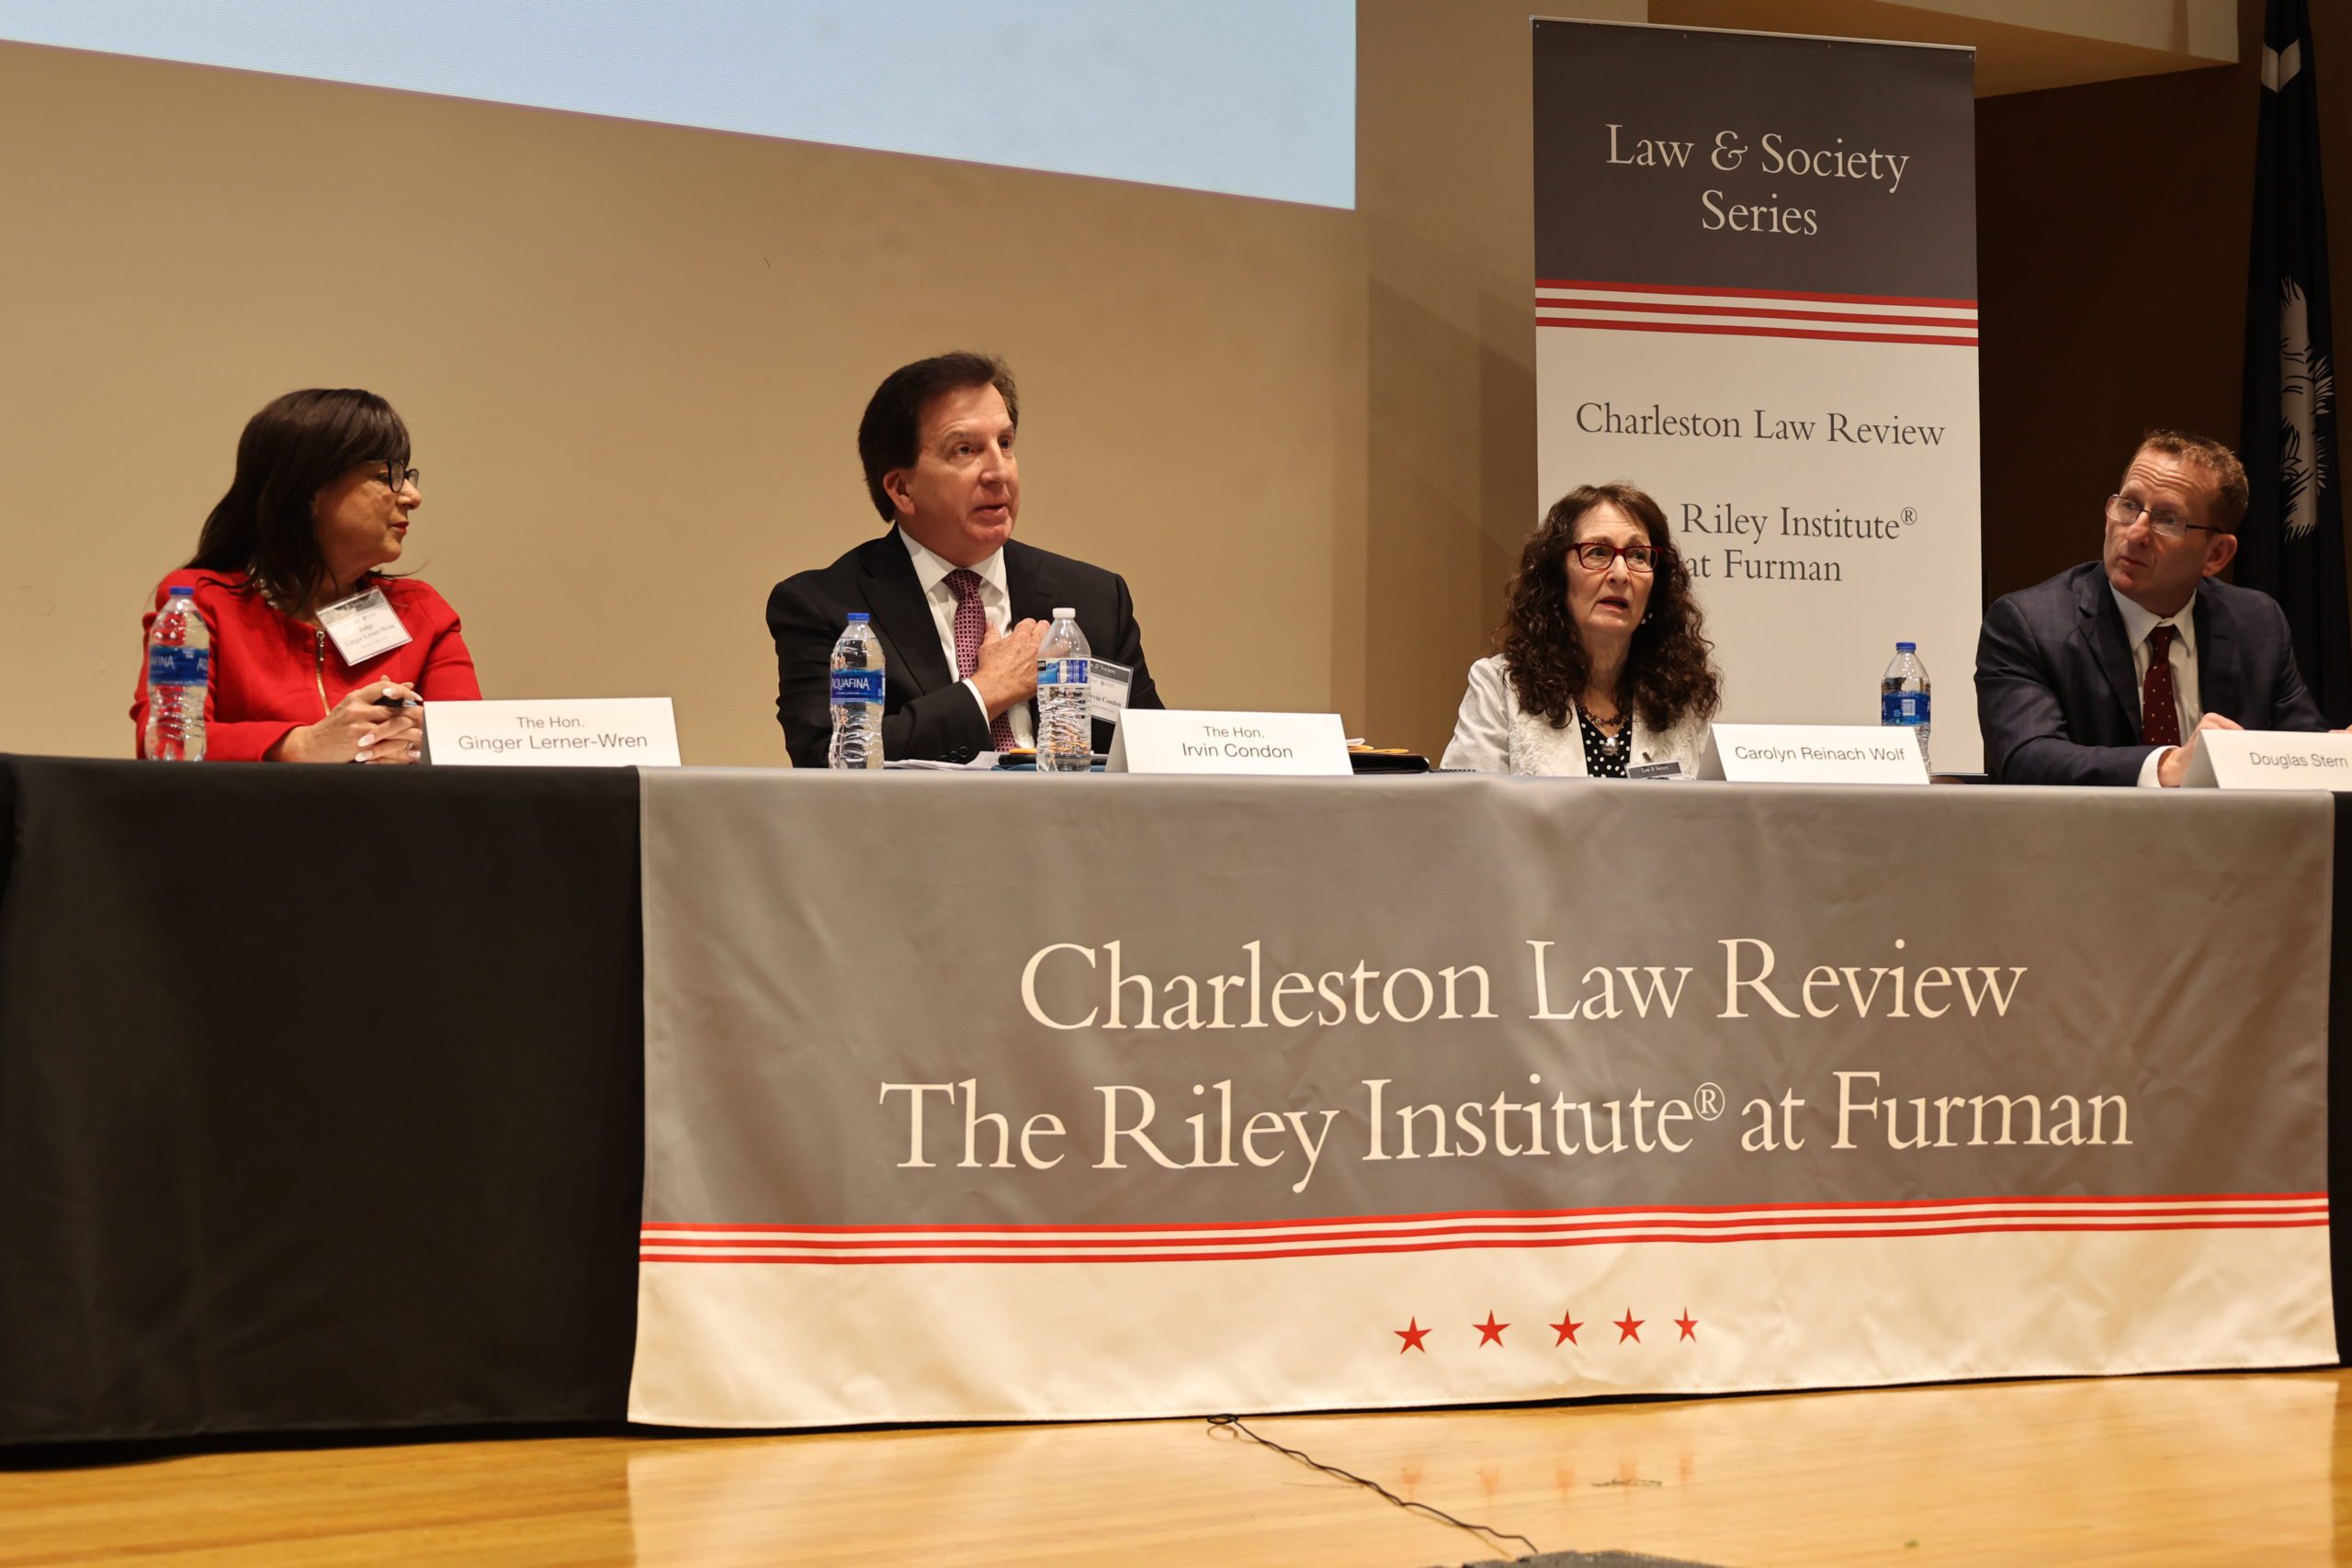 The Honorable Judge Ginger Lerner-Wren, The Honorable Judge Irvin Condon, Carolyn Reinach Wolf, Esq., and Douglas Stern, Esq. speak on a panel about the intersection of mental health and the law. 